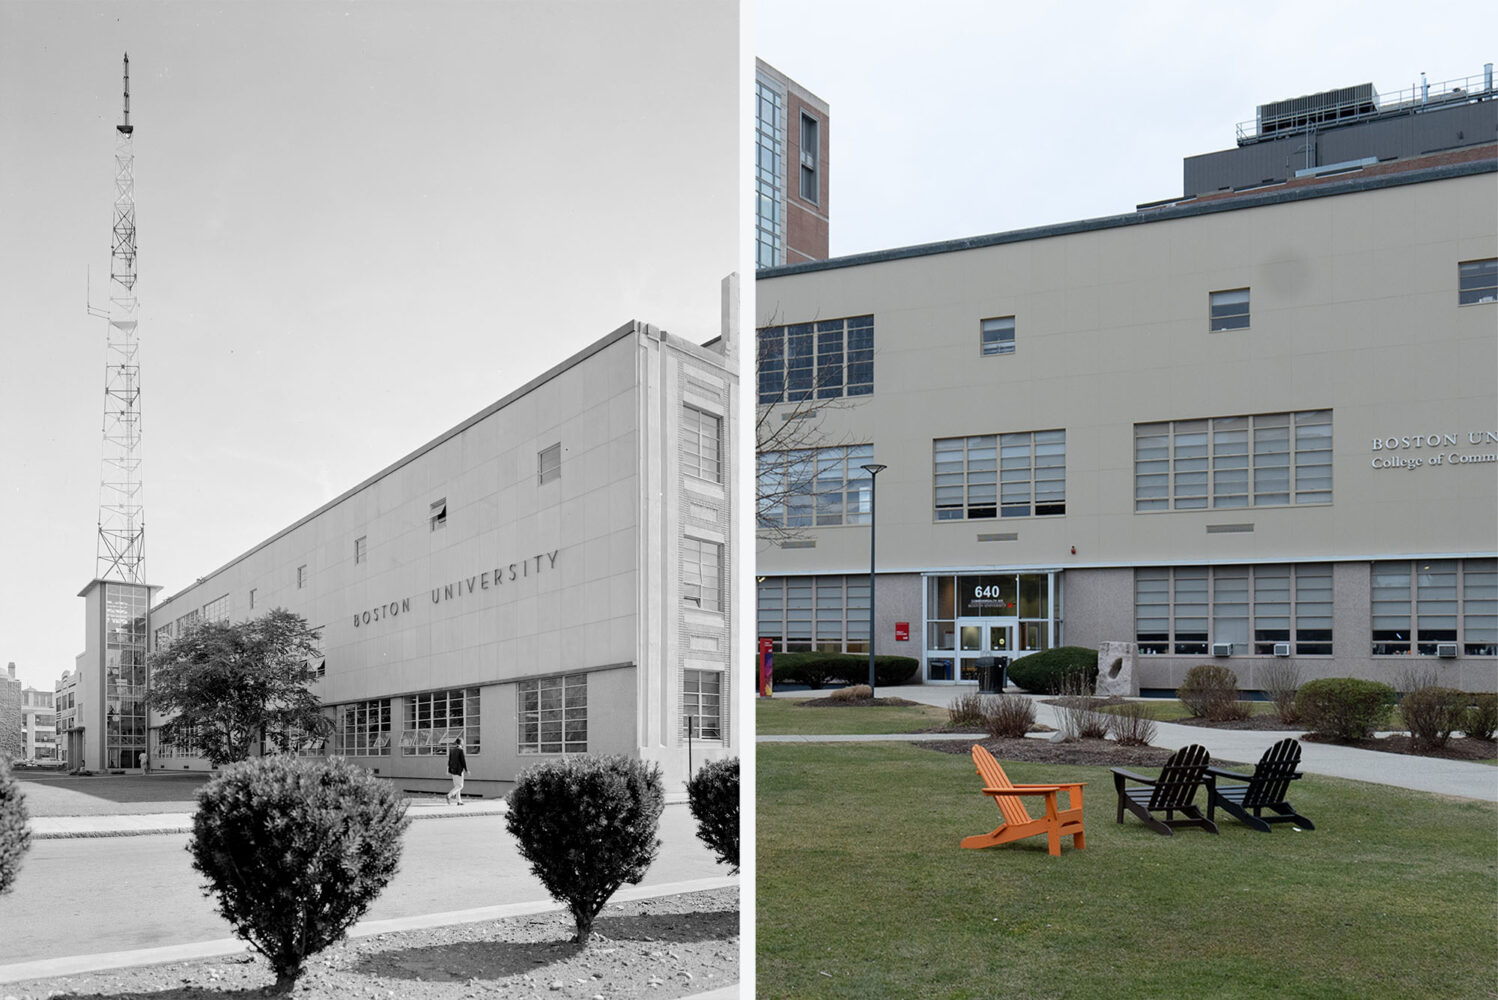 Photo: The exterior of the Boston University College of Communication, in the 1960s and the 2020s side by side